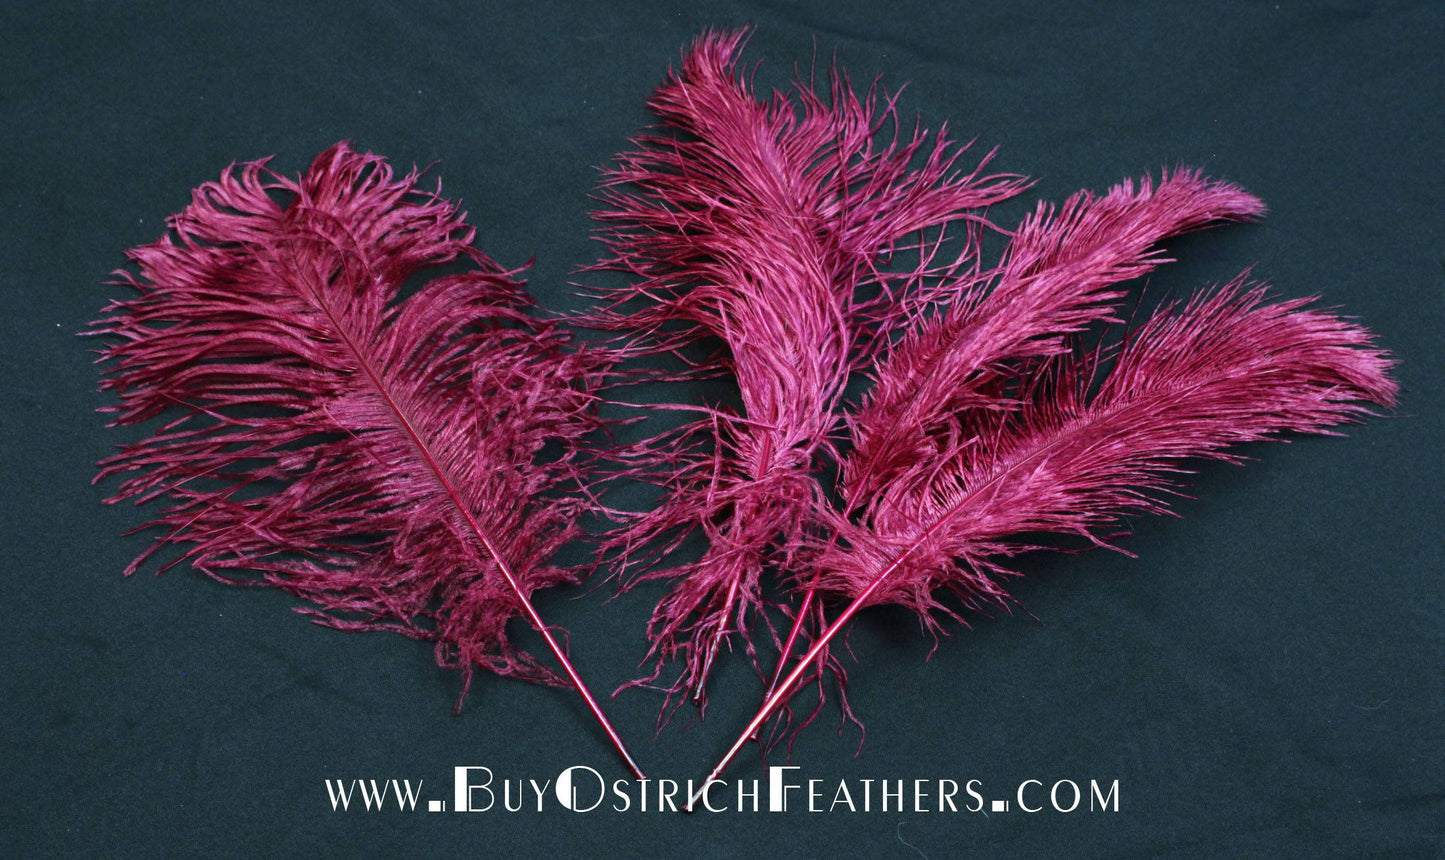 BULK 1/2lb Ostrich Feather Tail Plumes 15-20 (White) for Sale Online